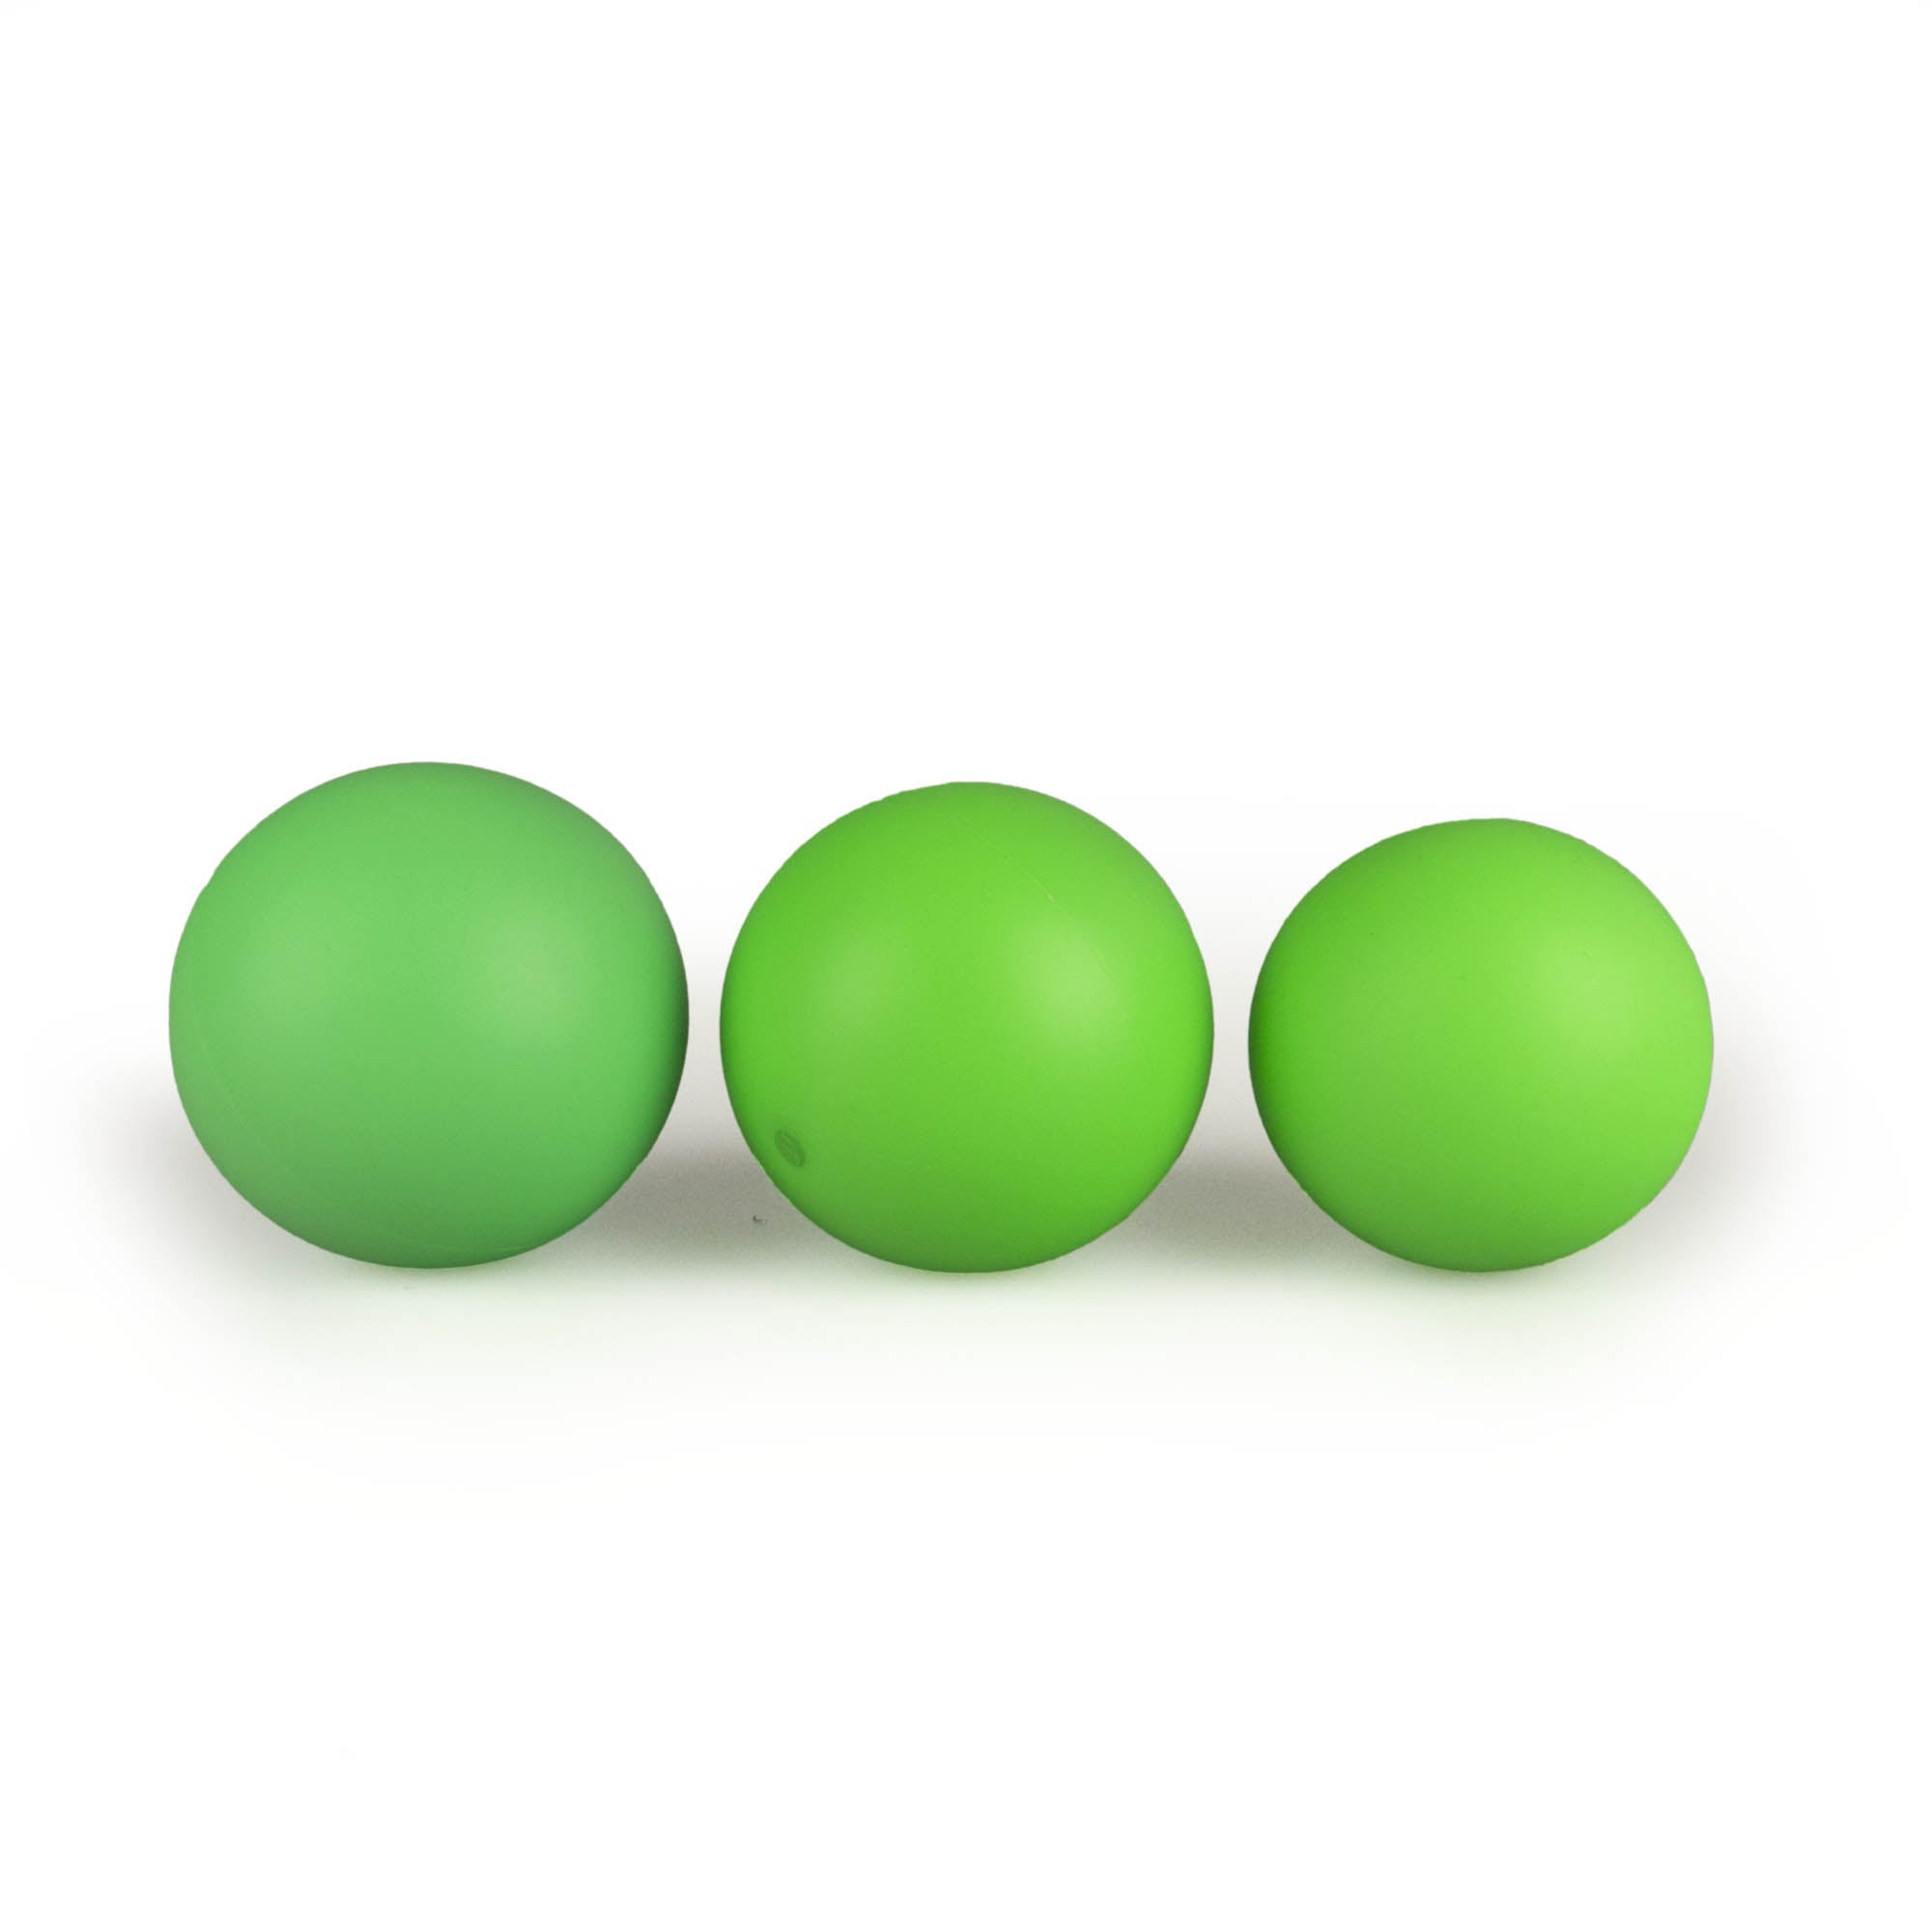 MMX juggling ball comparison in green